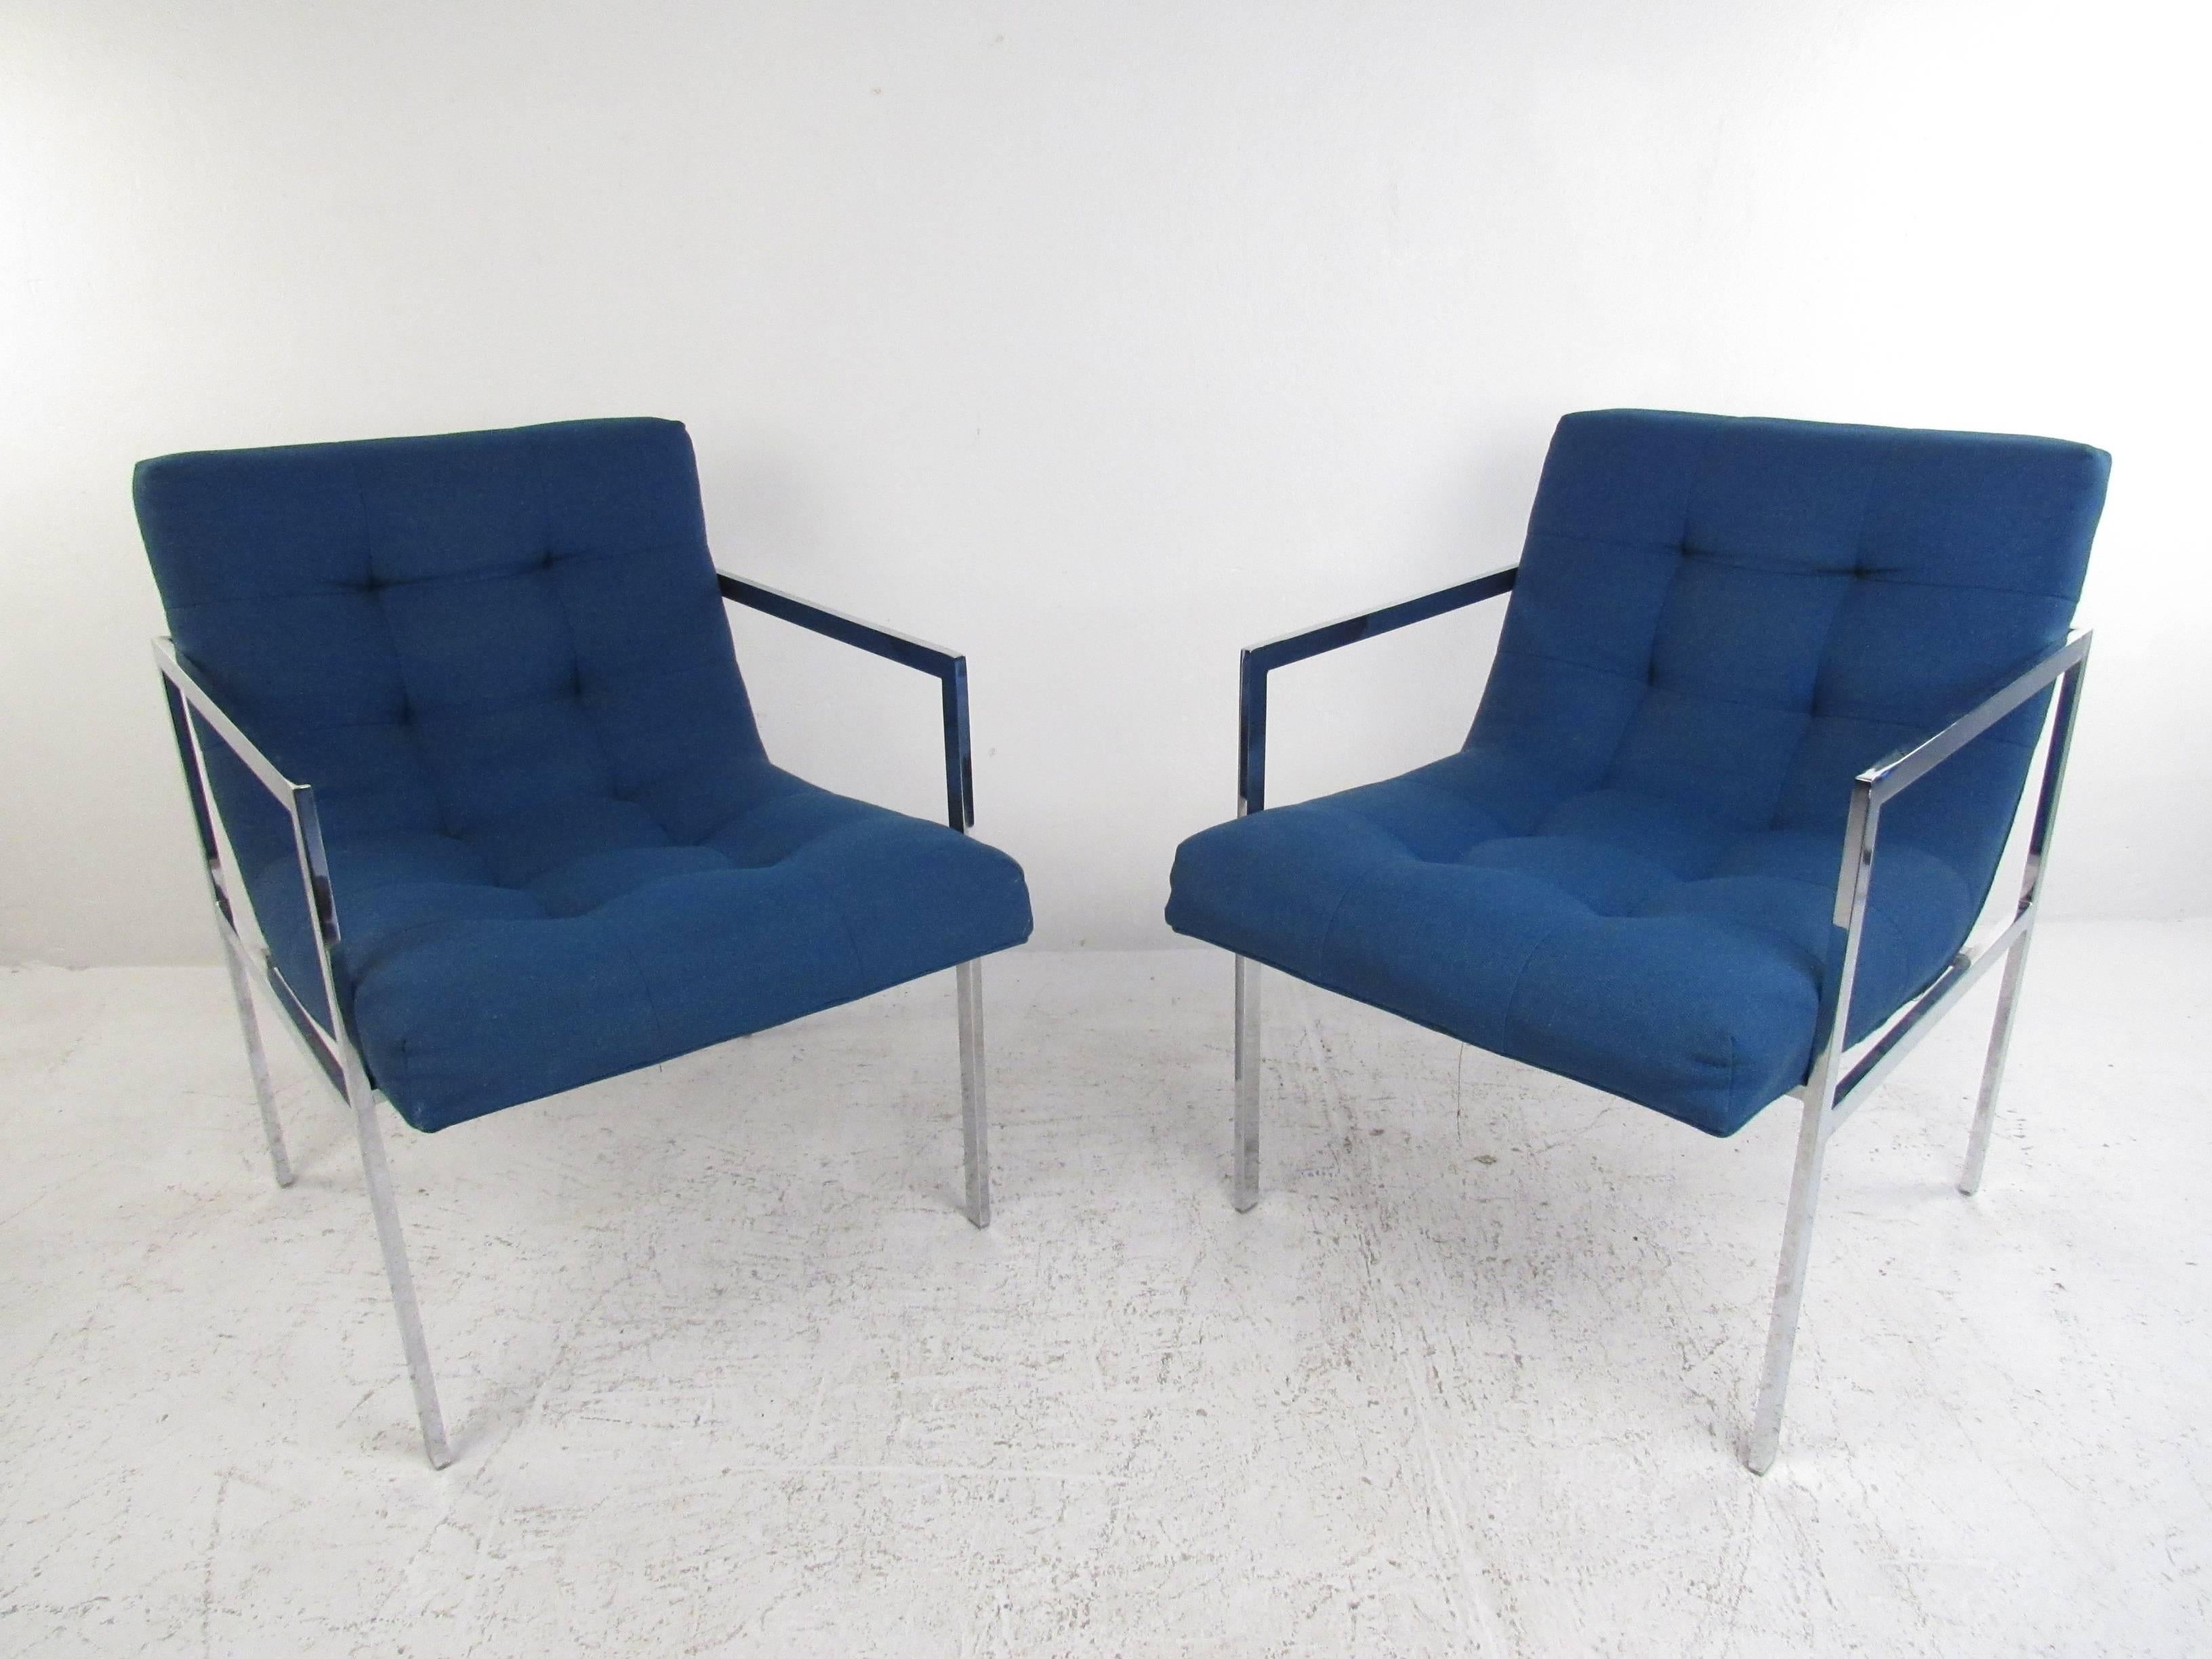 This pair of vintage chrome frame armchairs feature plush upholstery with a uniquely designed seat back for added comfort. Tufted buttons add to the unique Mid-Century style of the pair, while simple metal frames wonderfully compliment the pair.